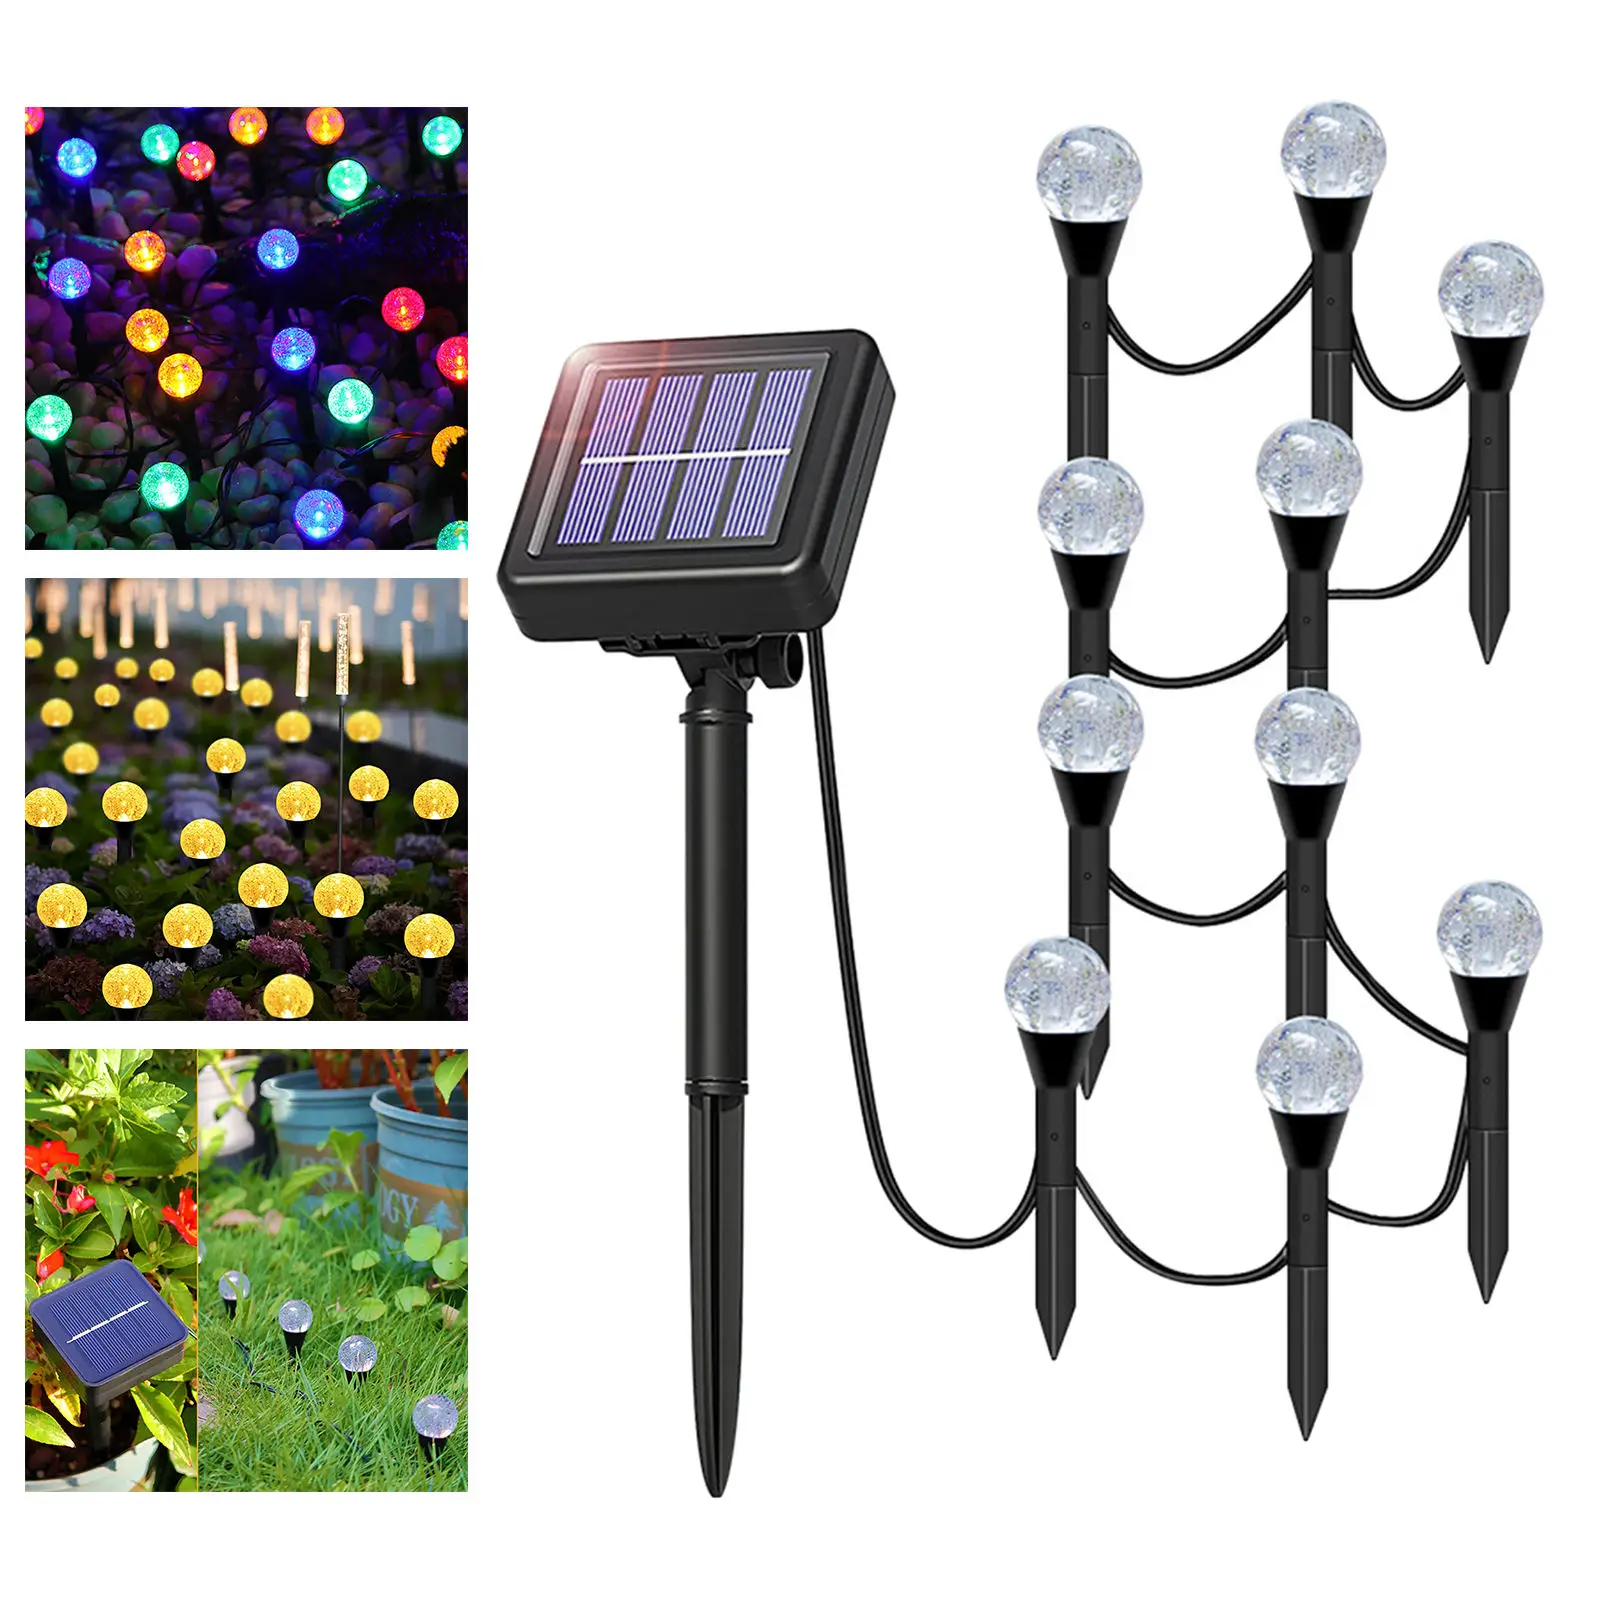 Rustproof Solar Powered Light Decorative In-Ground Garden Lights Night Lamp for Yard Lawn Patio Driveway Auto On/Off